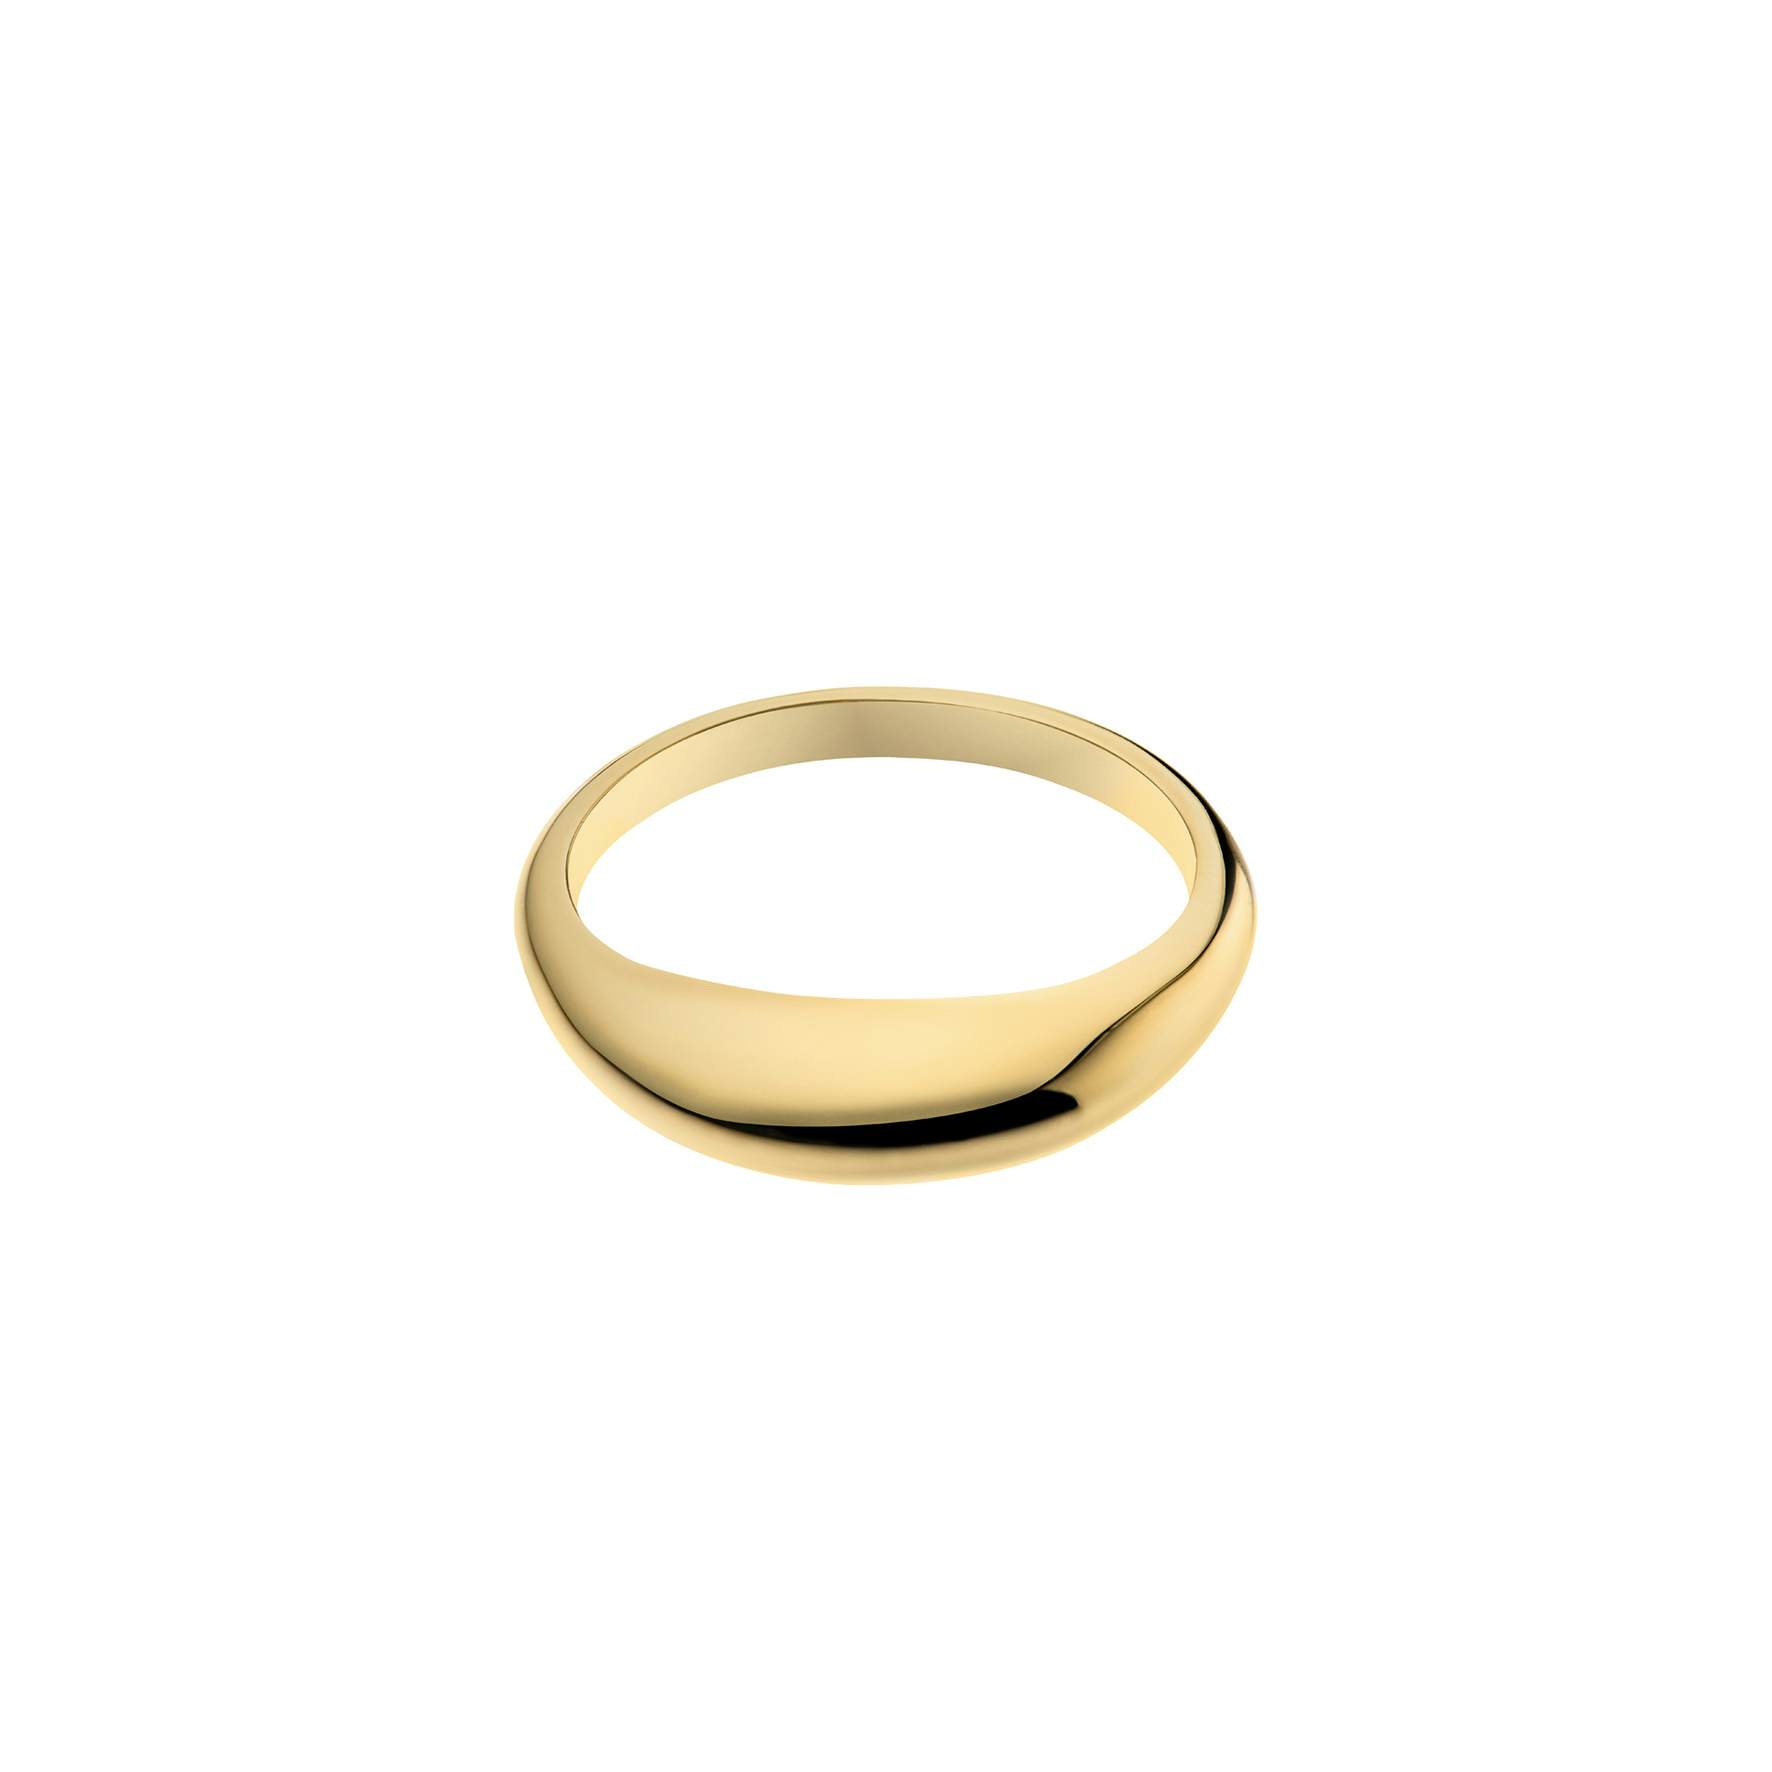 Globe Ring from Pernille Corydon in Goldplated-Silver Sterling 925